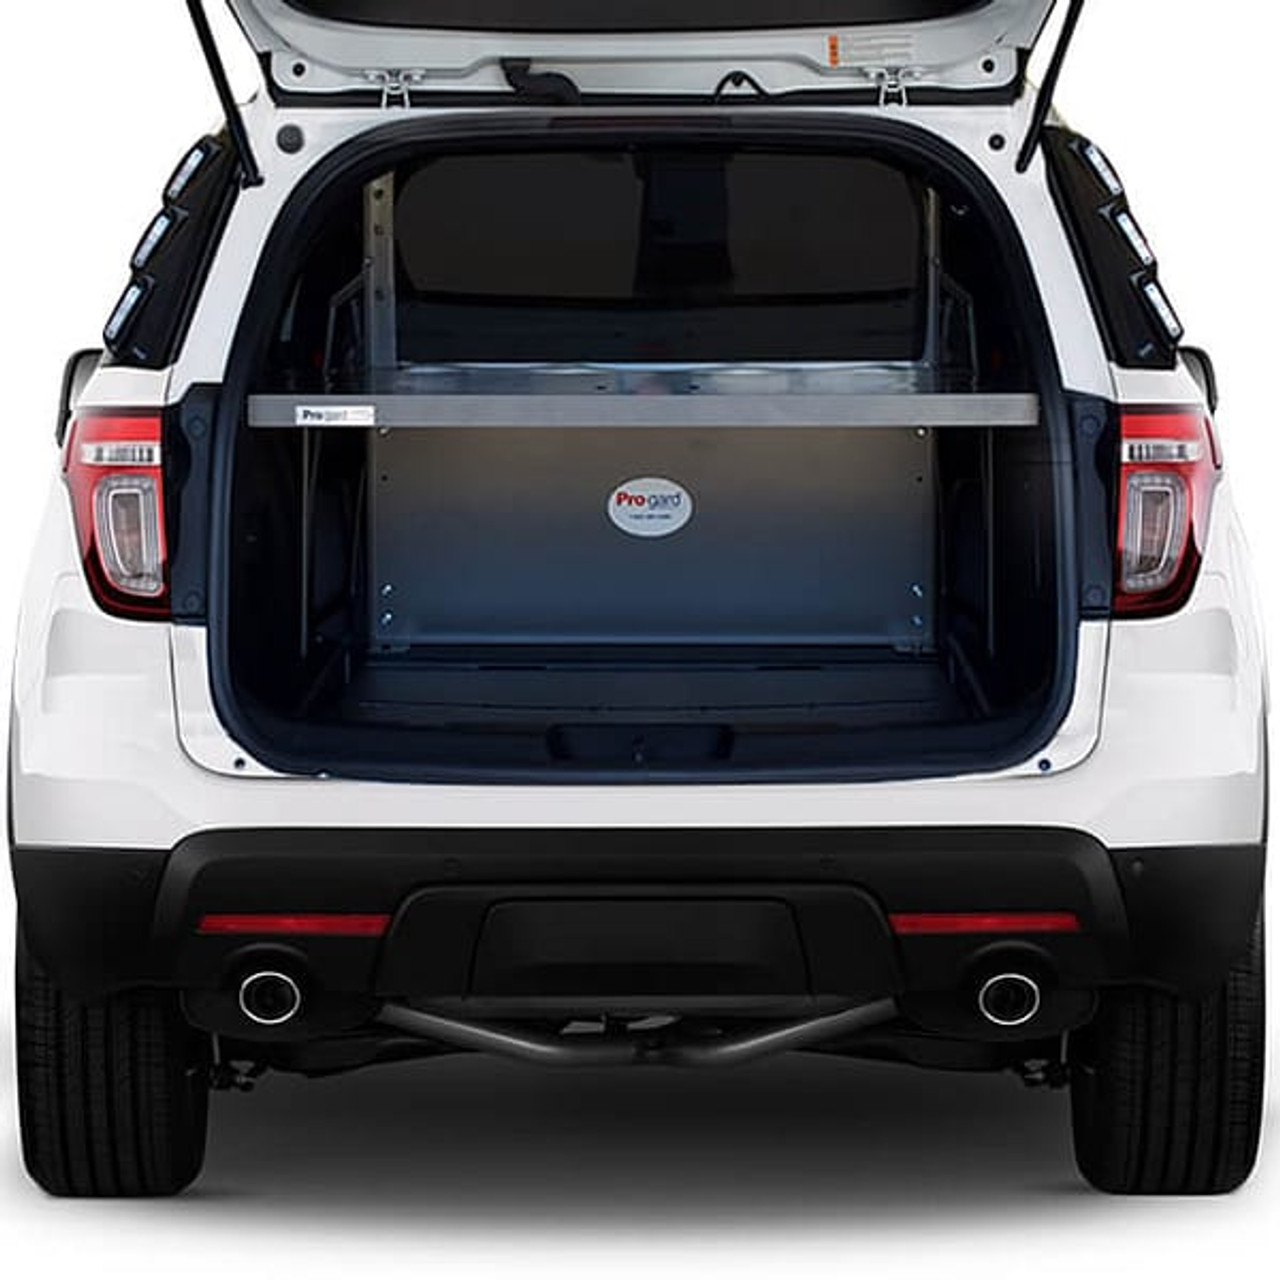 Pro-Gard Steel Cargo Security Covers, Creates Secure Cargo Storage Area, Use With Or Without Cargo Barrier, For 2013-2022 Ford Interceptor Utility or 2015-2022 Chevrolet Tahoe PPV, Or 2018-2022 Dodge Durango PPV/SSV